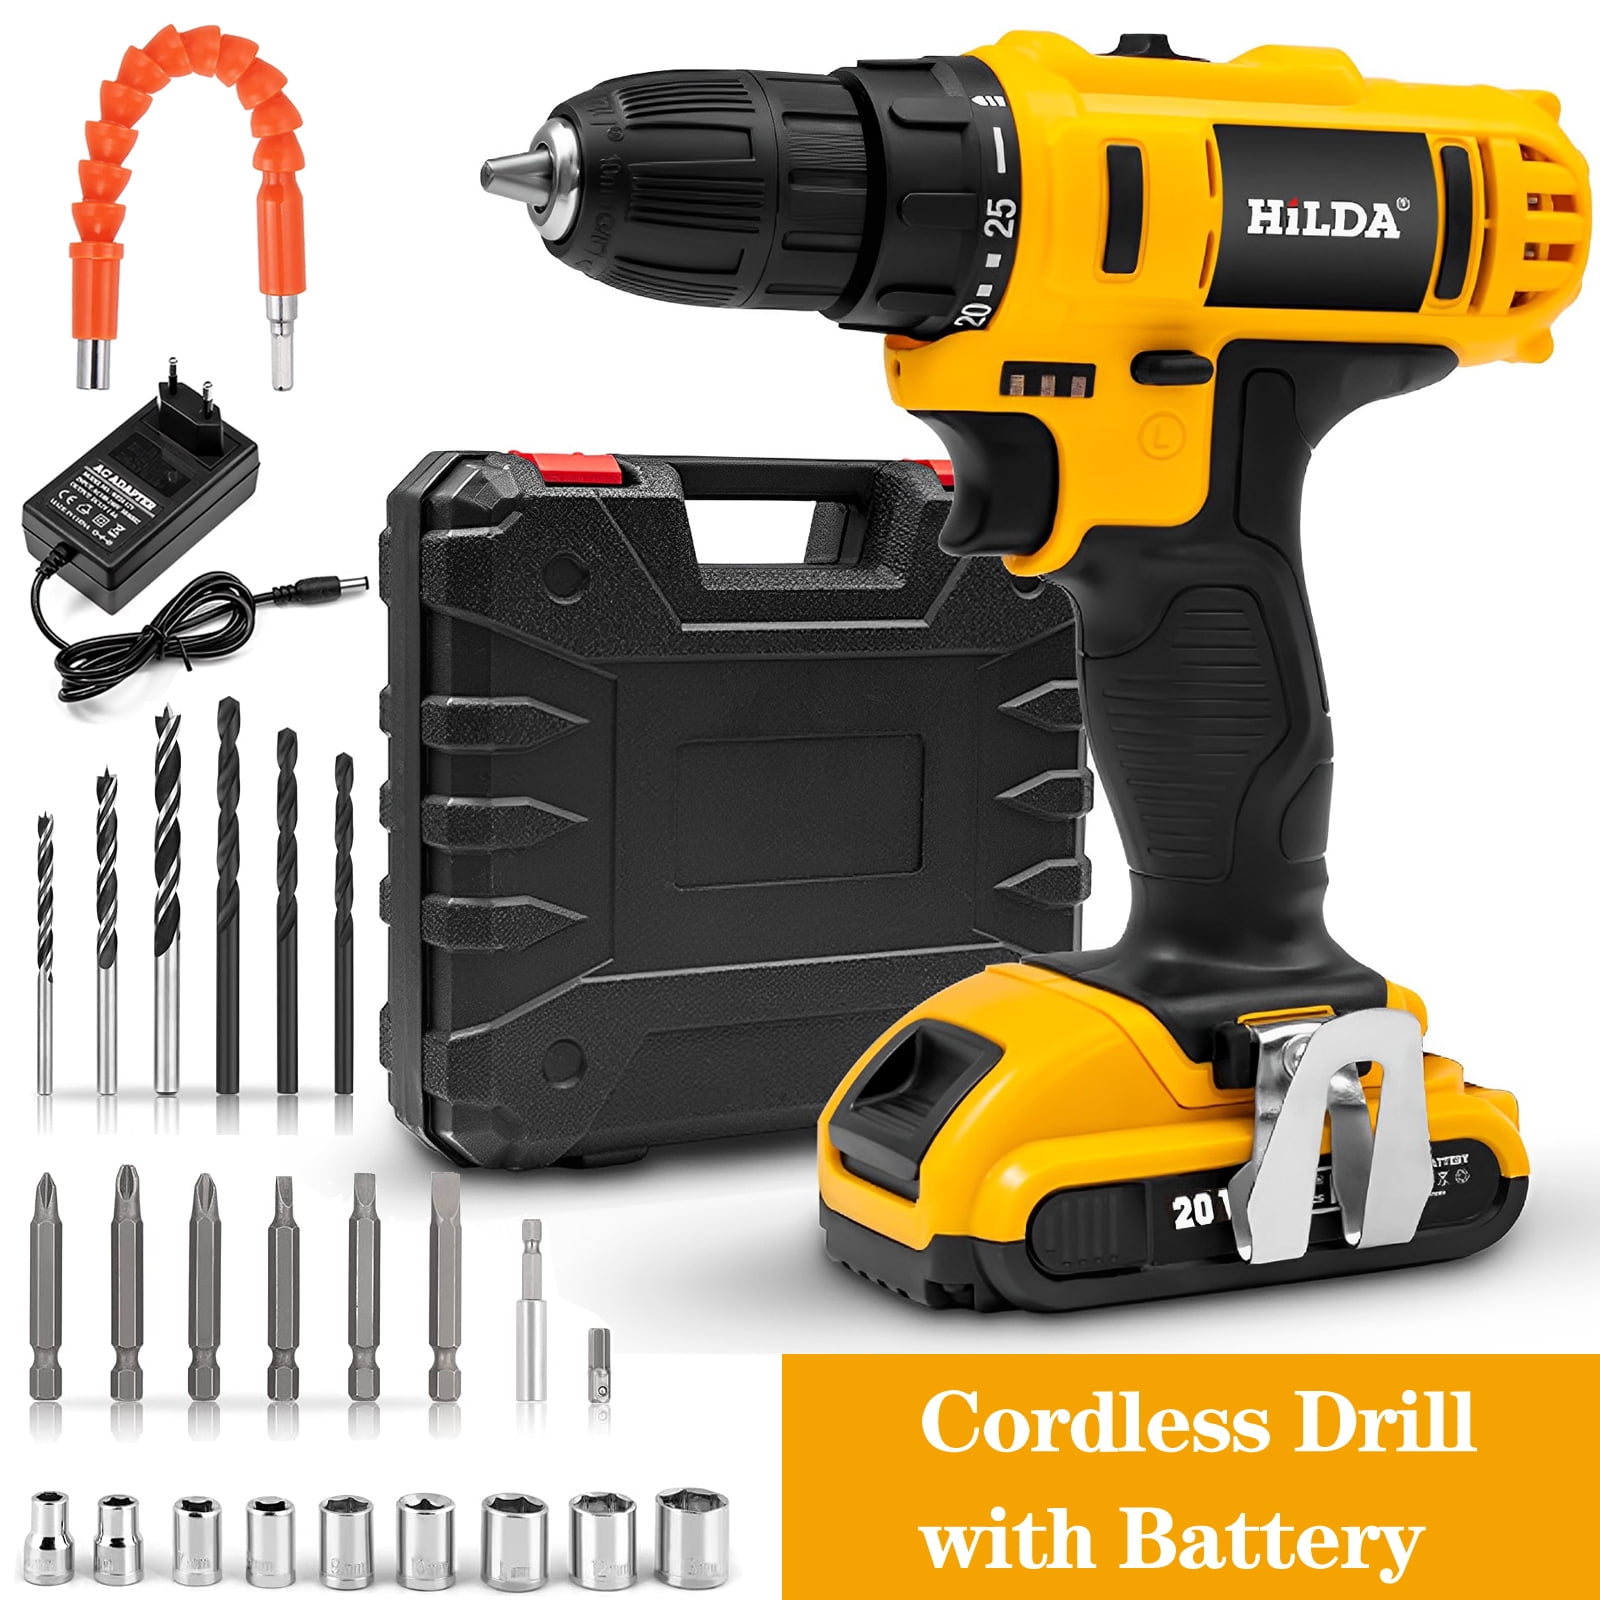 HiLDA Cordless Drill 20V Impact Drill Driver 3/8'' Electric Power Drill Set  - Variable Speed Trigger, 1500mAh Lithium-Ion Battery